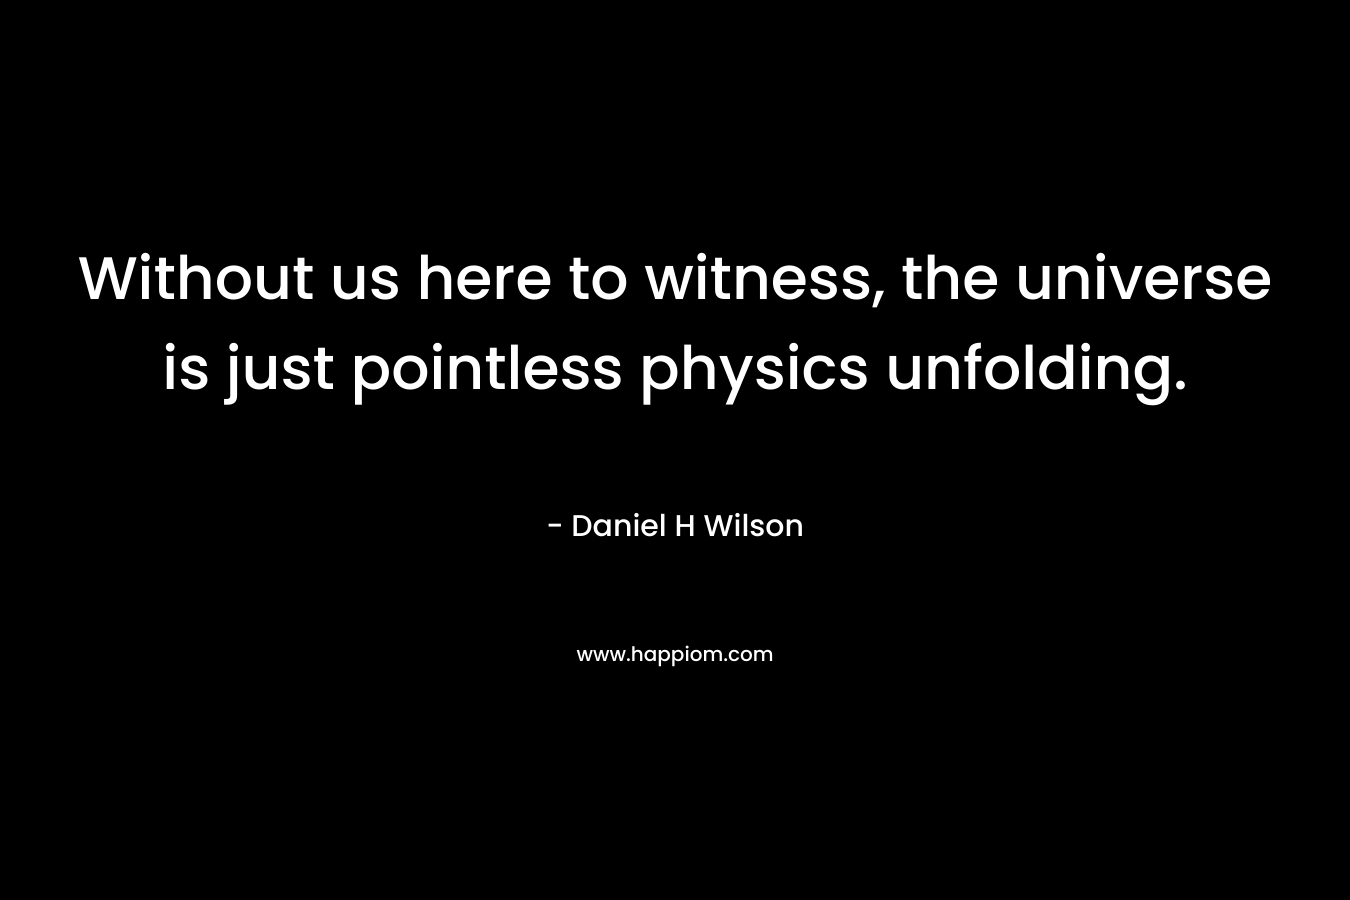 Without us here to witness, the universe is just pointless physics unfolding.